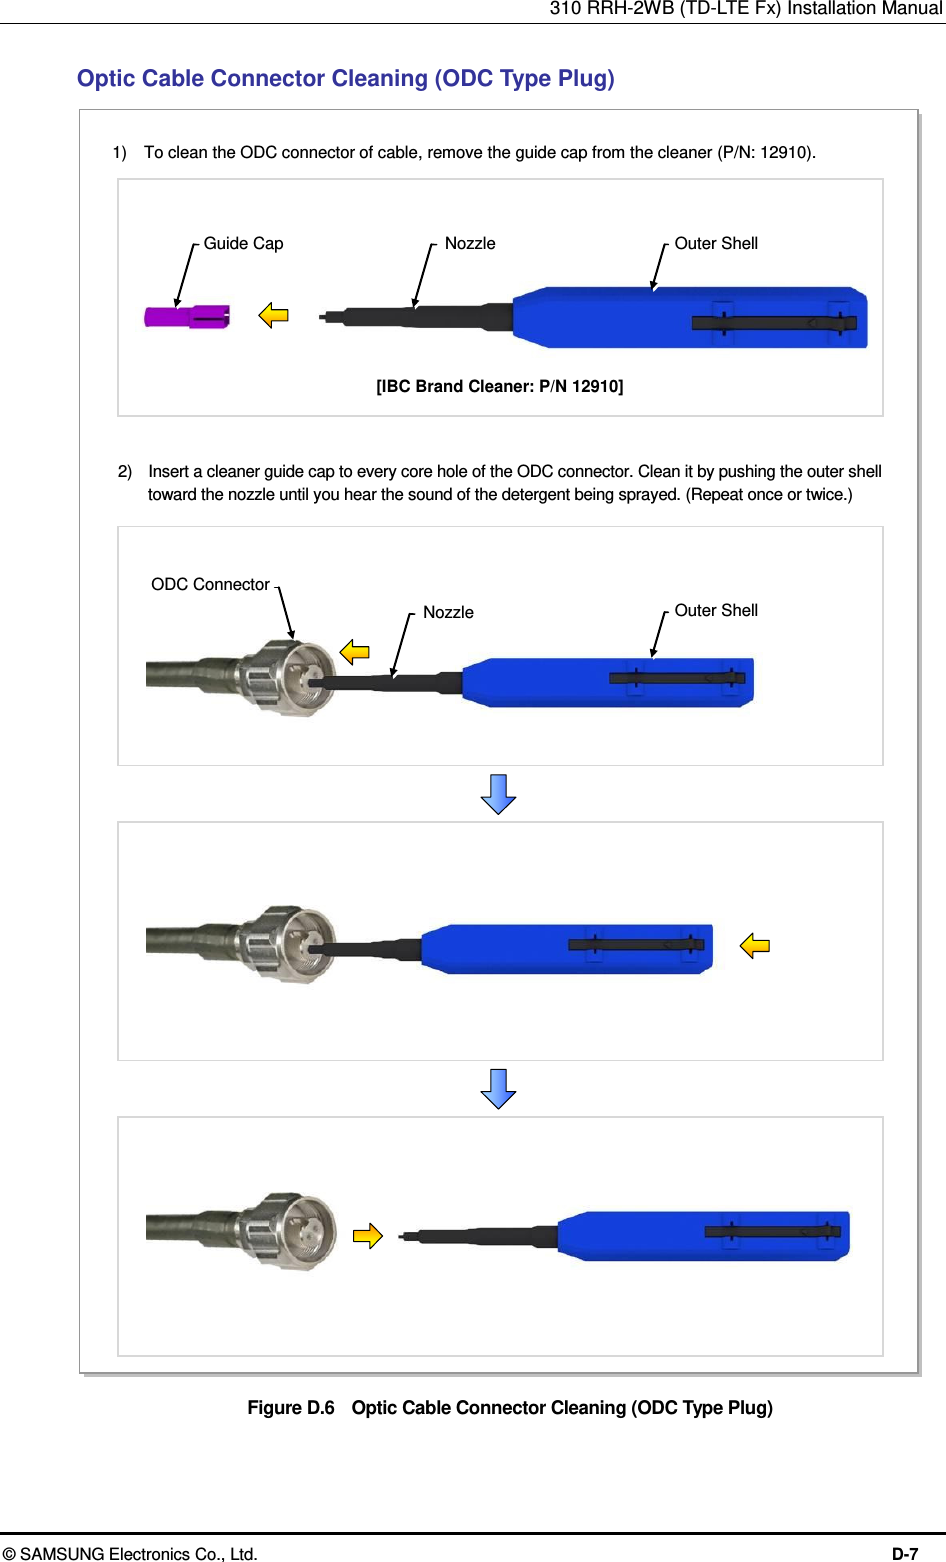 310 RRH-2WB (TD-LTE Fx) Installation Manual  © SAMSUNG Electronics Co., Ltd.  D-7 Optic Cable Connector Cleaning (ODC Type Plug) Figure D.6    Optic Cable Connector Cleaning (ODC Type Plug) Guide Cap 1)    To clean the ODC connector of cable, remove the guide cap from the cleaner (P/N: 12910).  2)    Insert a cleaner guide cap to every core hole of the ODC connector. Clean it by pushing the outer shell toward the nozzle until you hear the sound of the detergent being sprayed. (Repeat once or twice.)  Outer Shell Nozzle Outer Shell Nozzle ODC Connector [IBC Brand Cleaner: P/N 12910] 